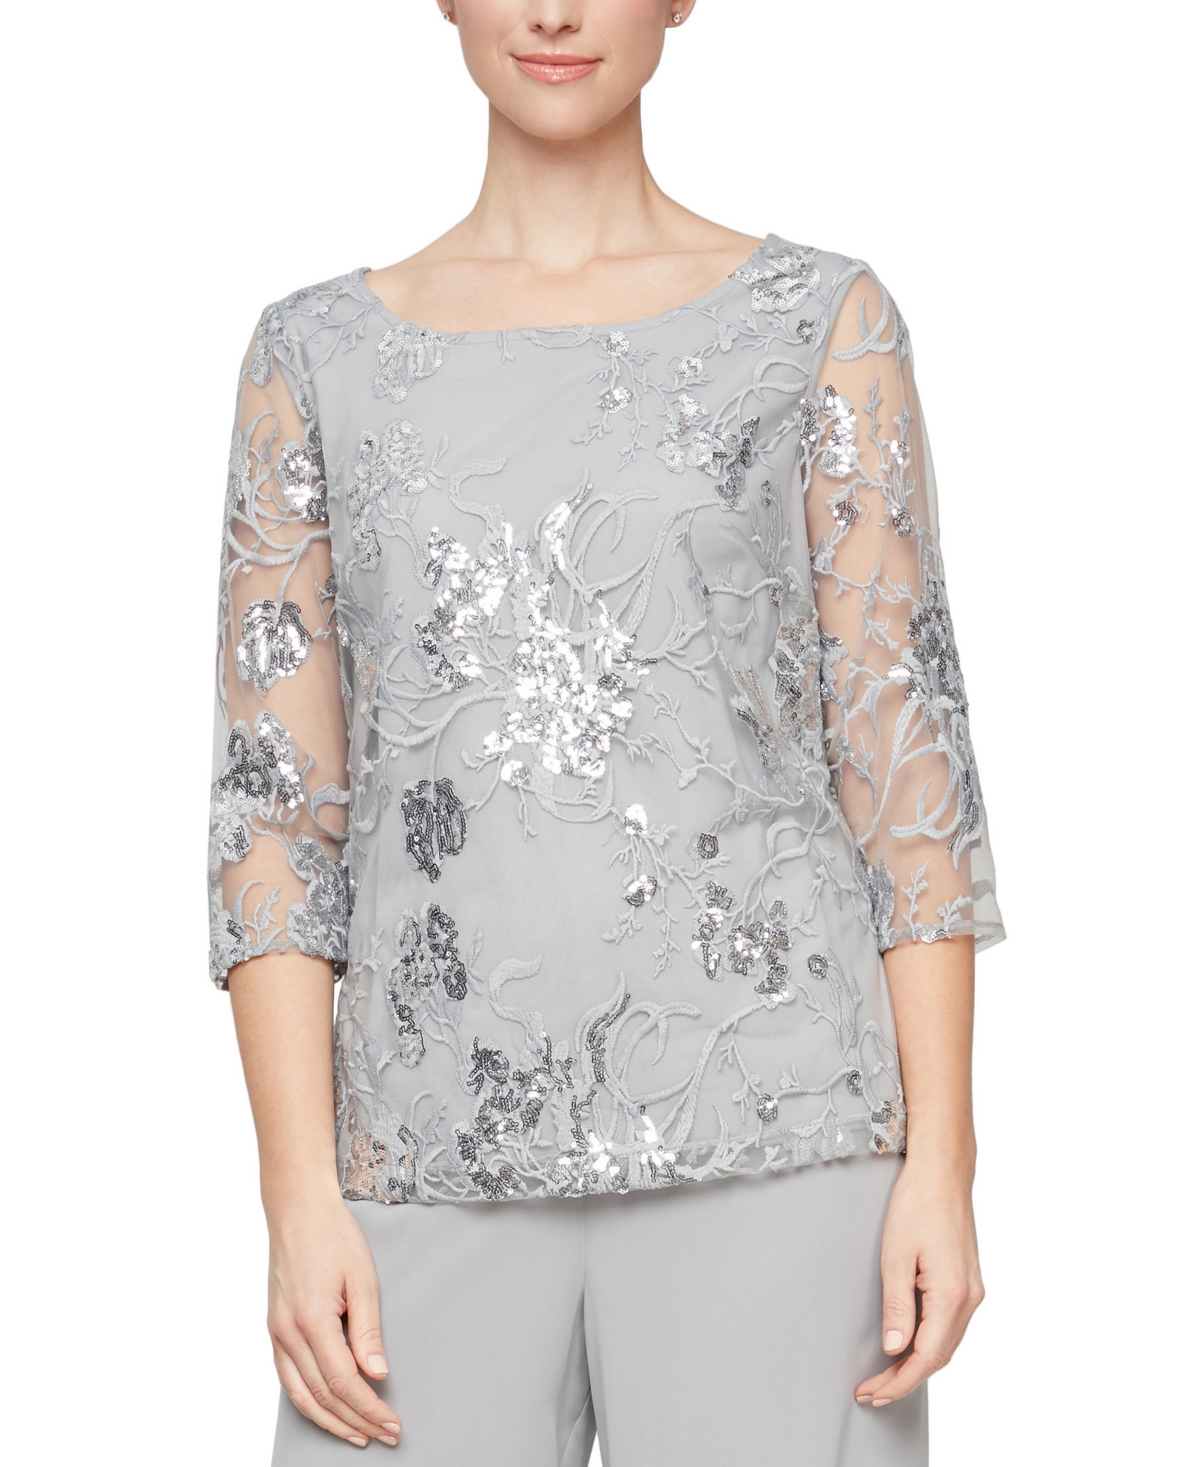  Alex Evenings Women's Sequined Embroidered Illusion-Sleeve Top